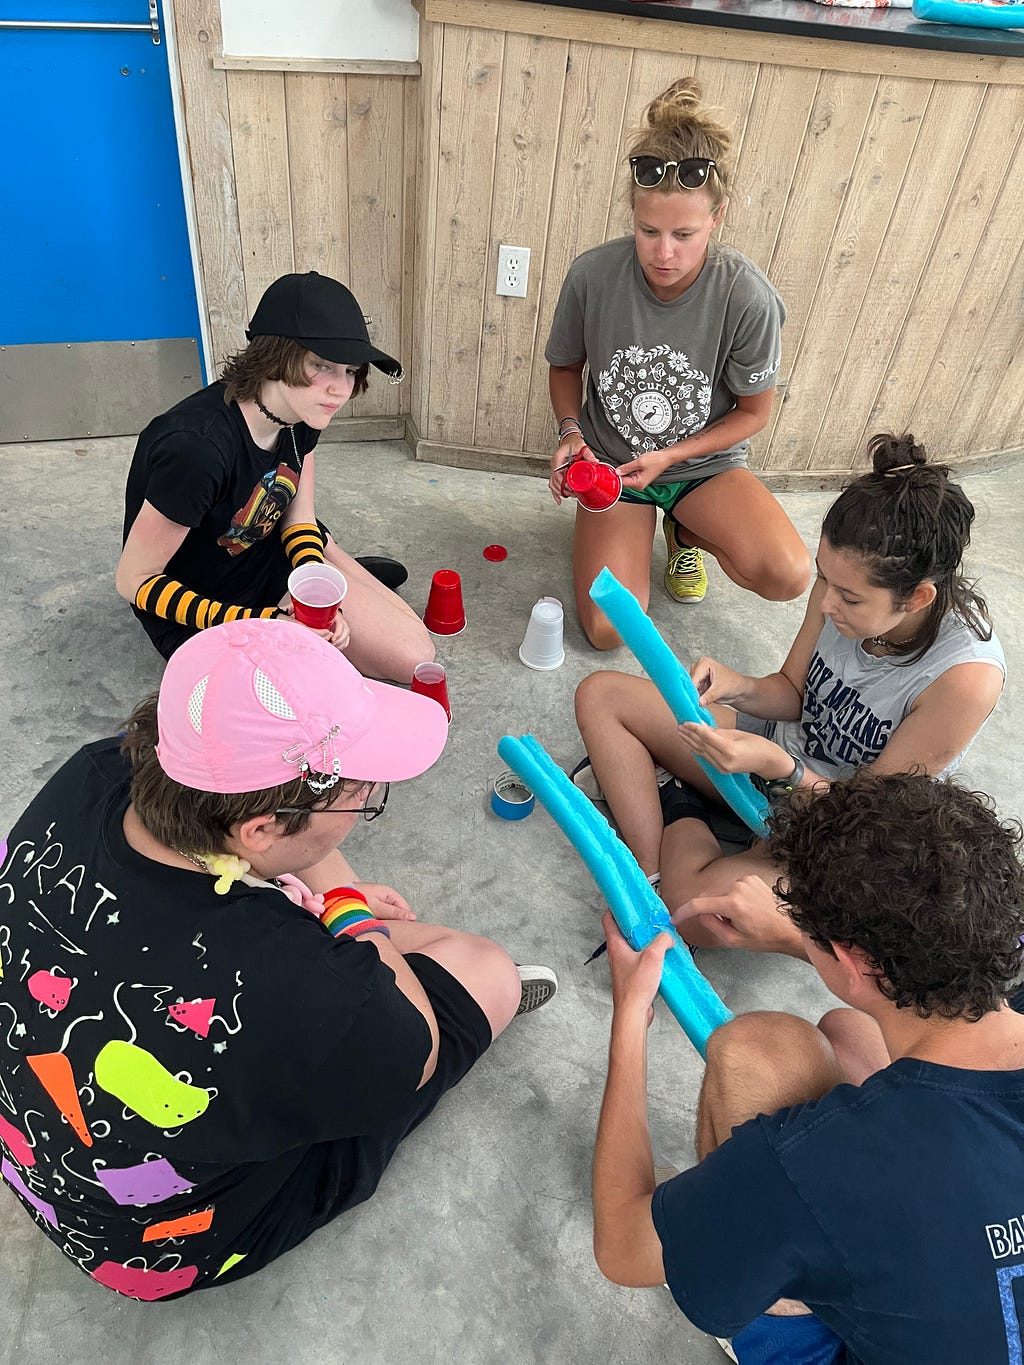 campers and activity leader have various supplies on the ground including pool noodles, tape, and cups. Th are discussing their strategy for creating a marble tunnel.